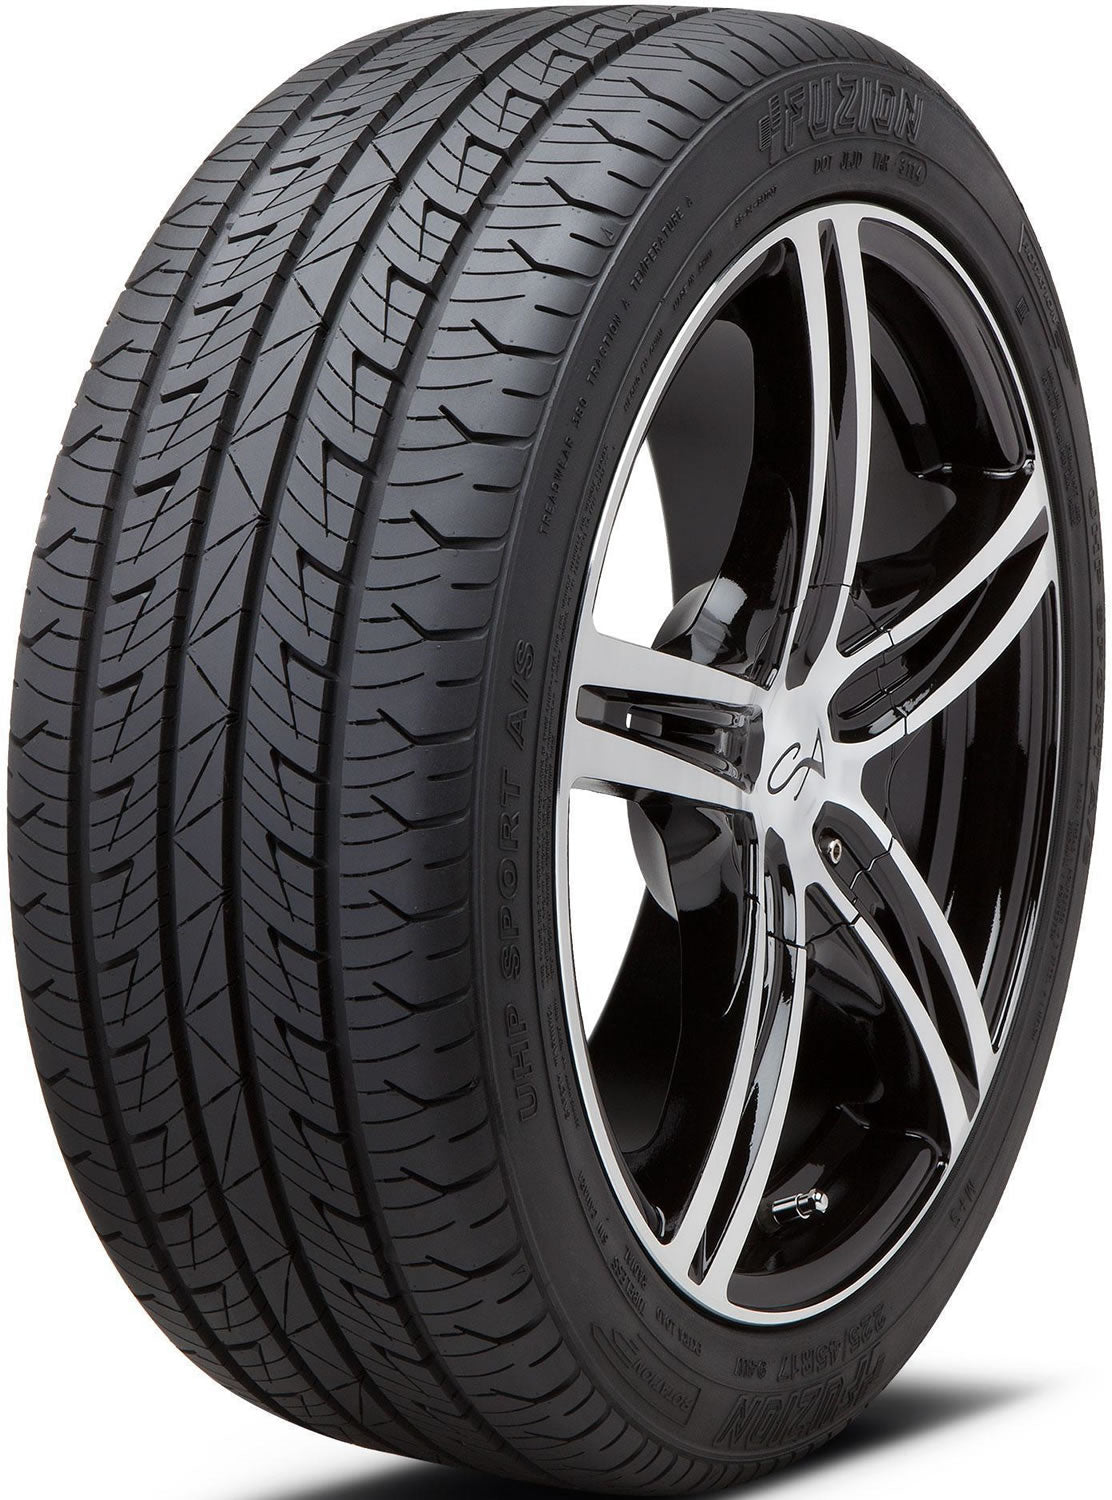 FUZION UHP SPORT AS 225/45R17 (25X8.9R 17) Tires